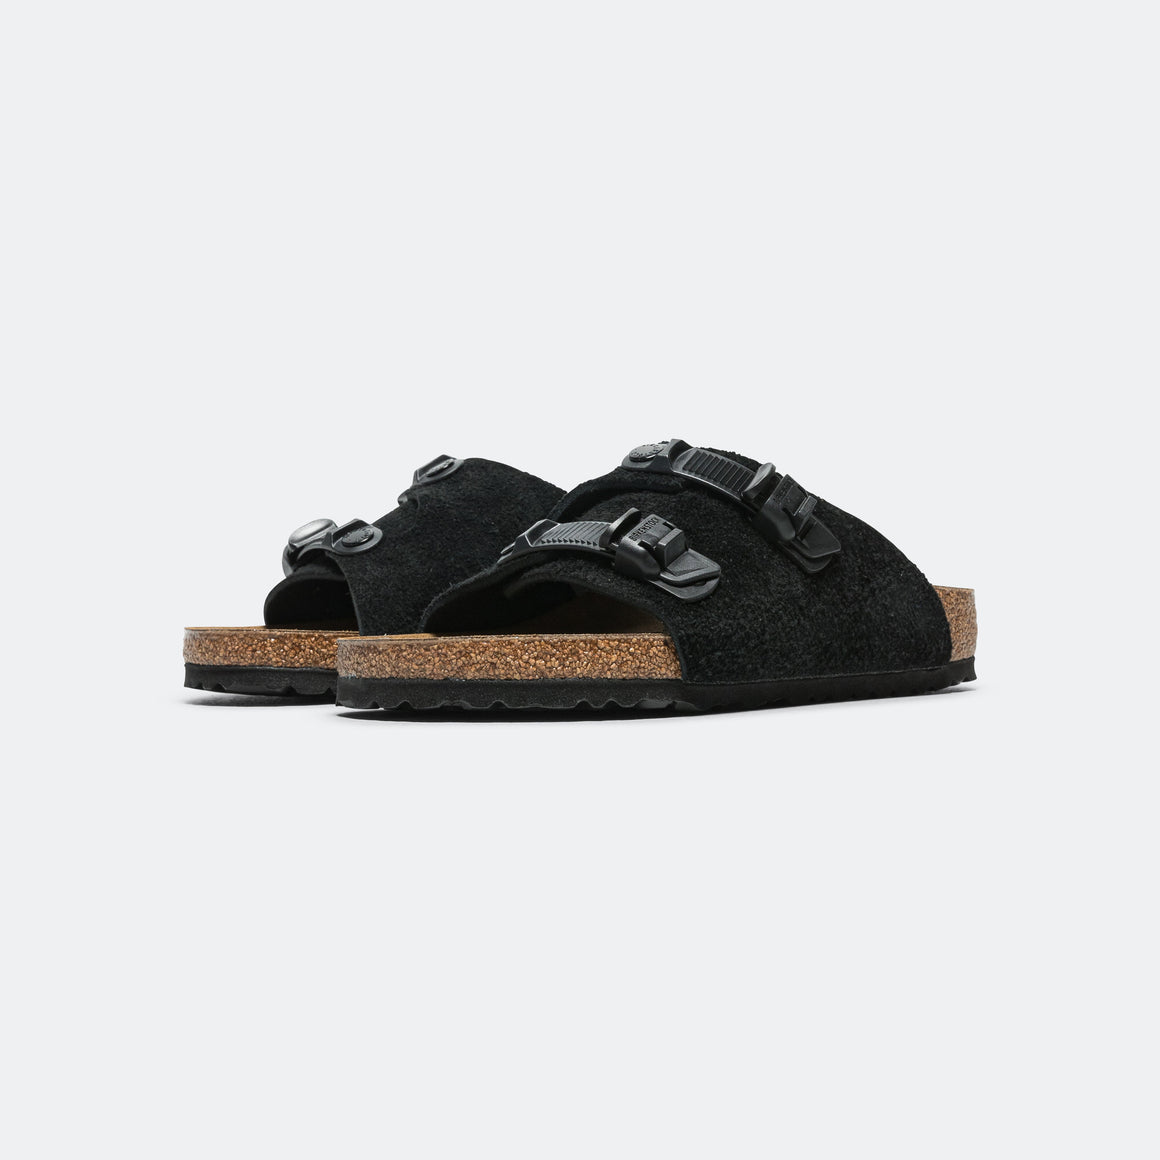 Birkenstock - Zurich Tech - Black Suede Leather - UP THERE